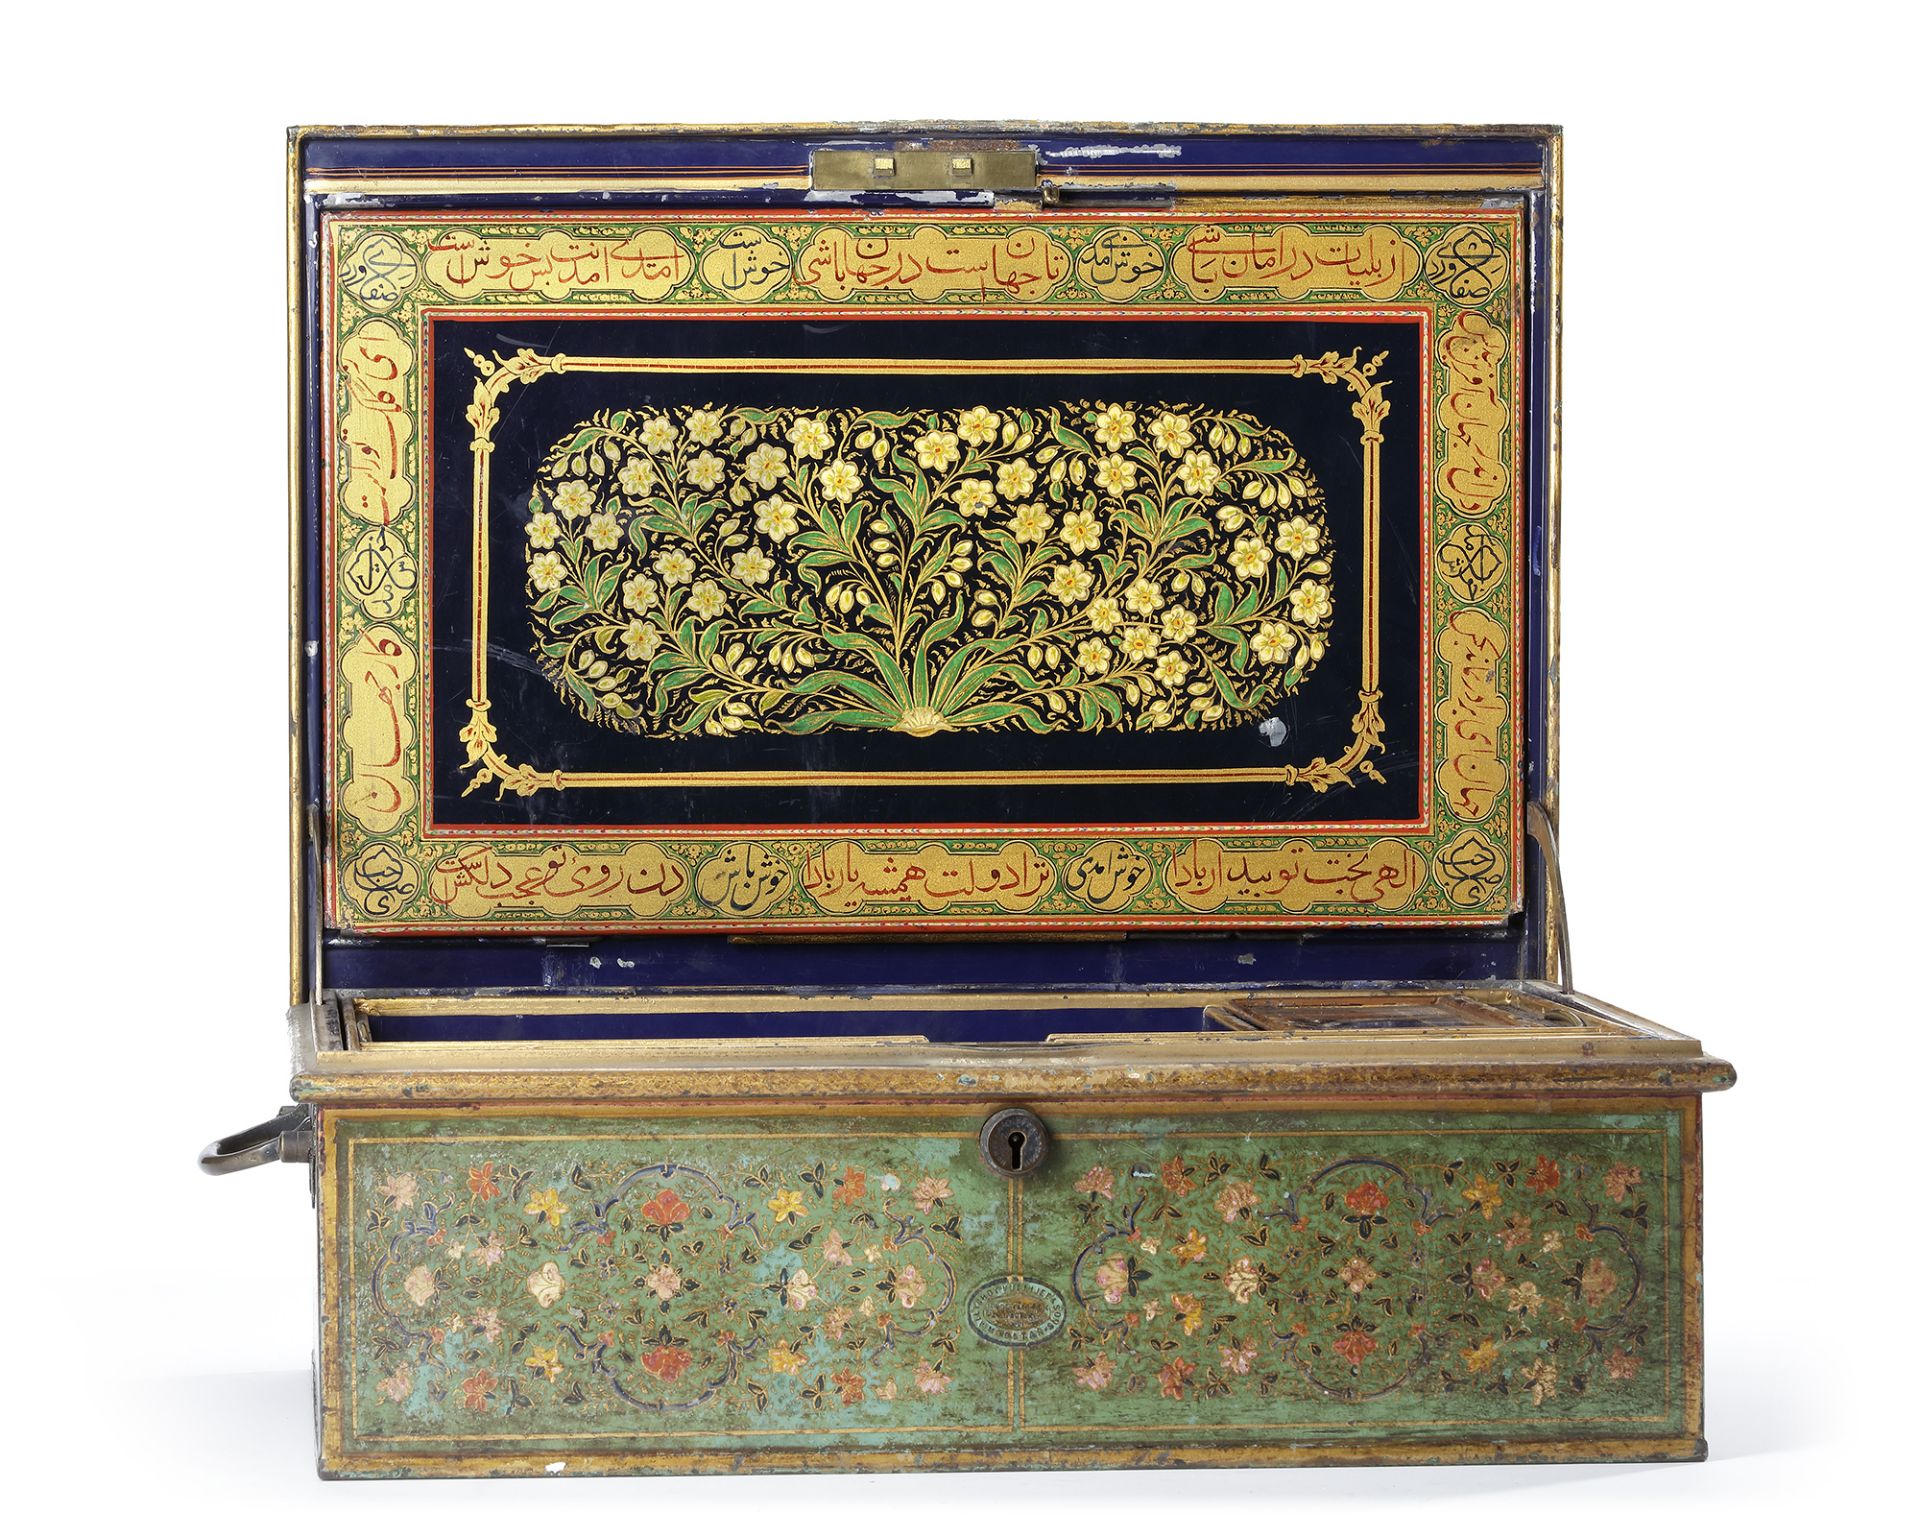 AN ANGLO-PERSIAN METAL DISPATCH BOX BY ALLIBHOY VALLIJEE & SONS 1897 - Image 3 of 6